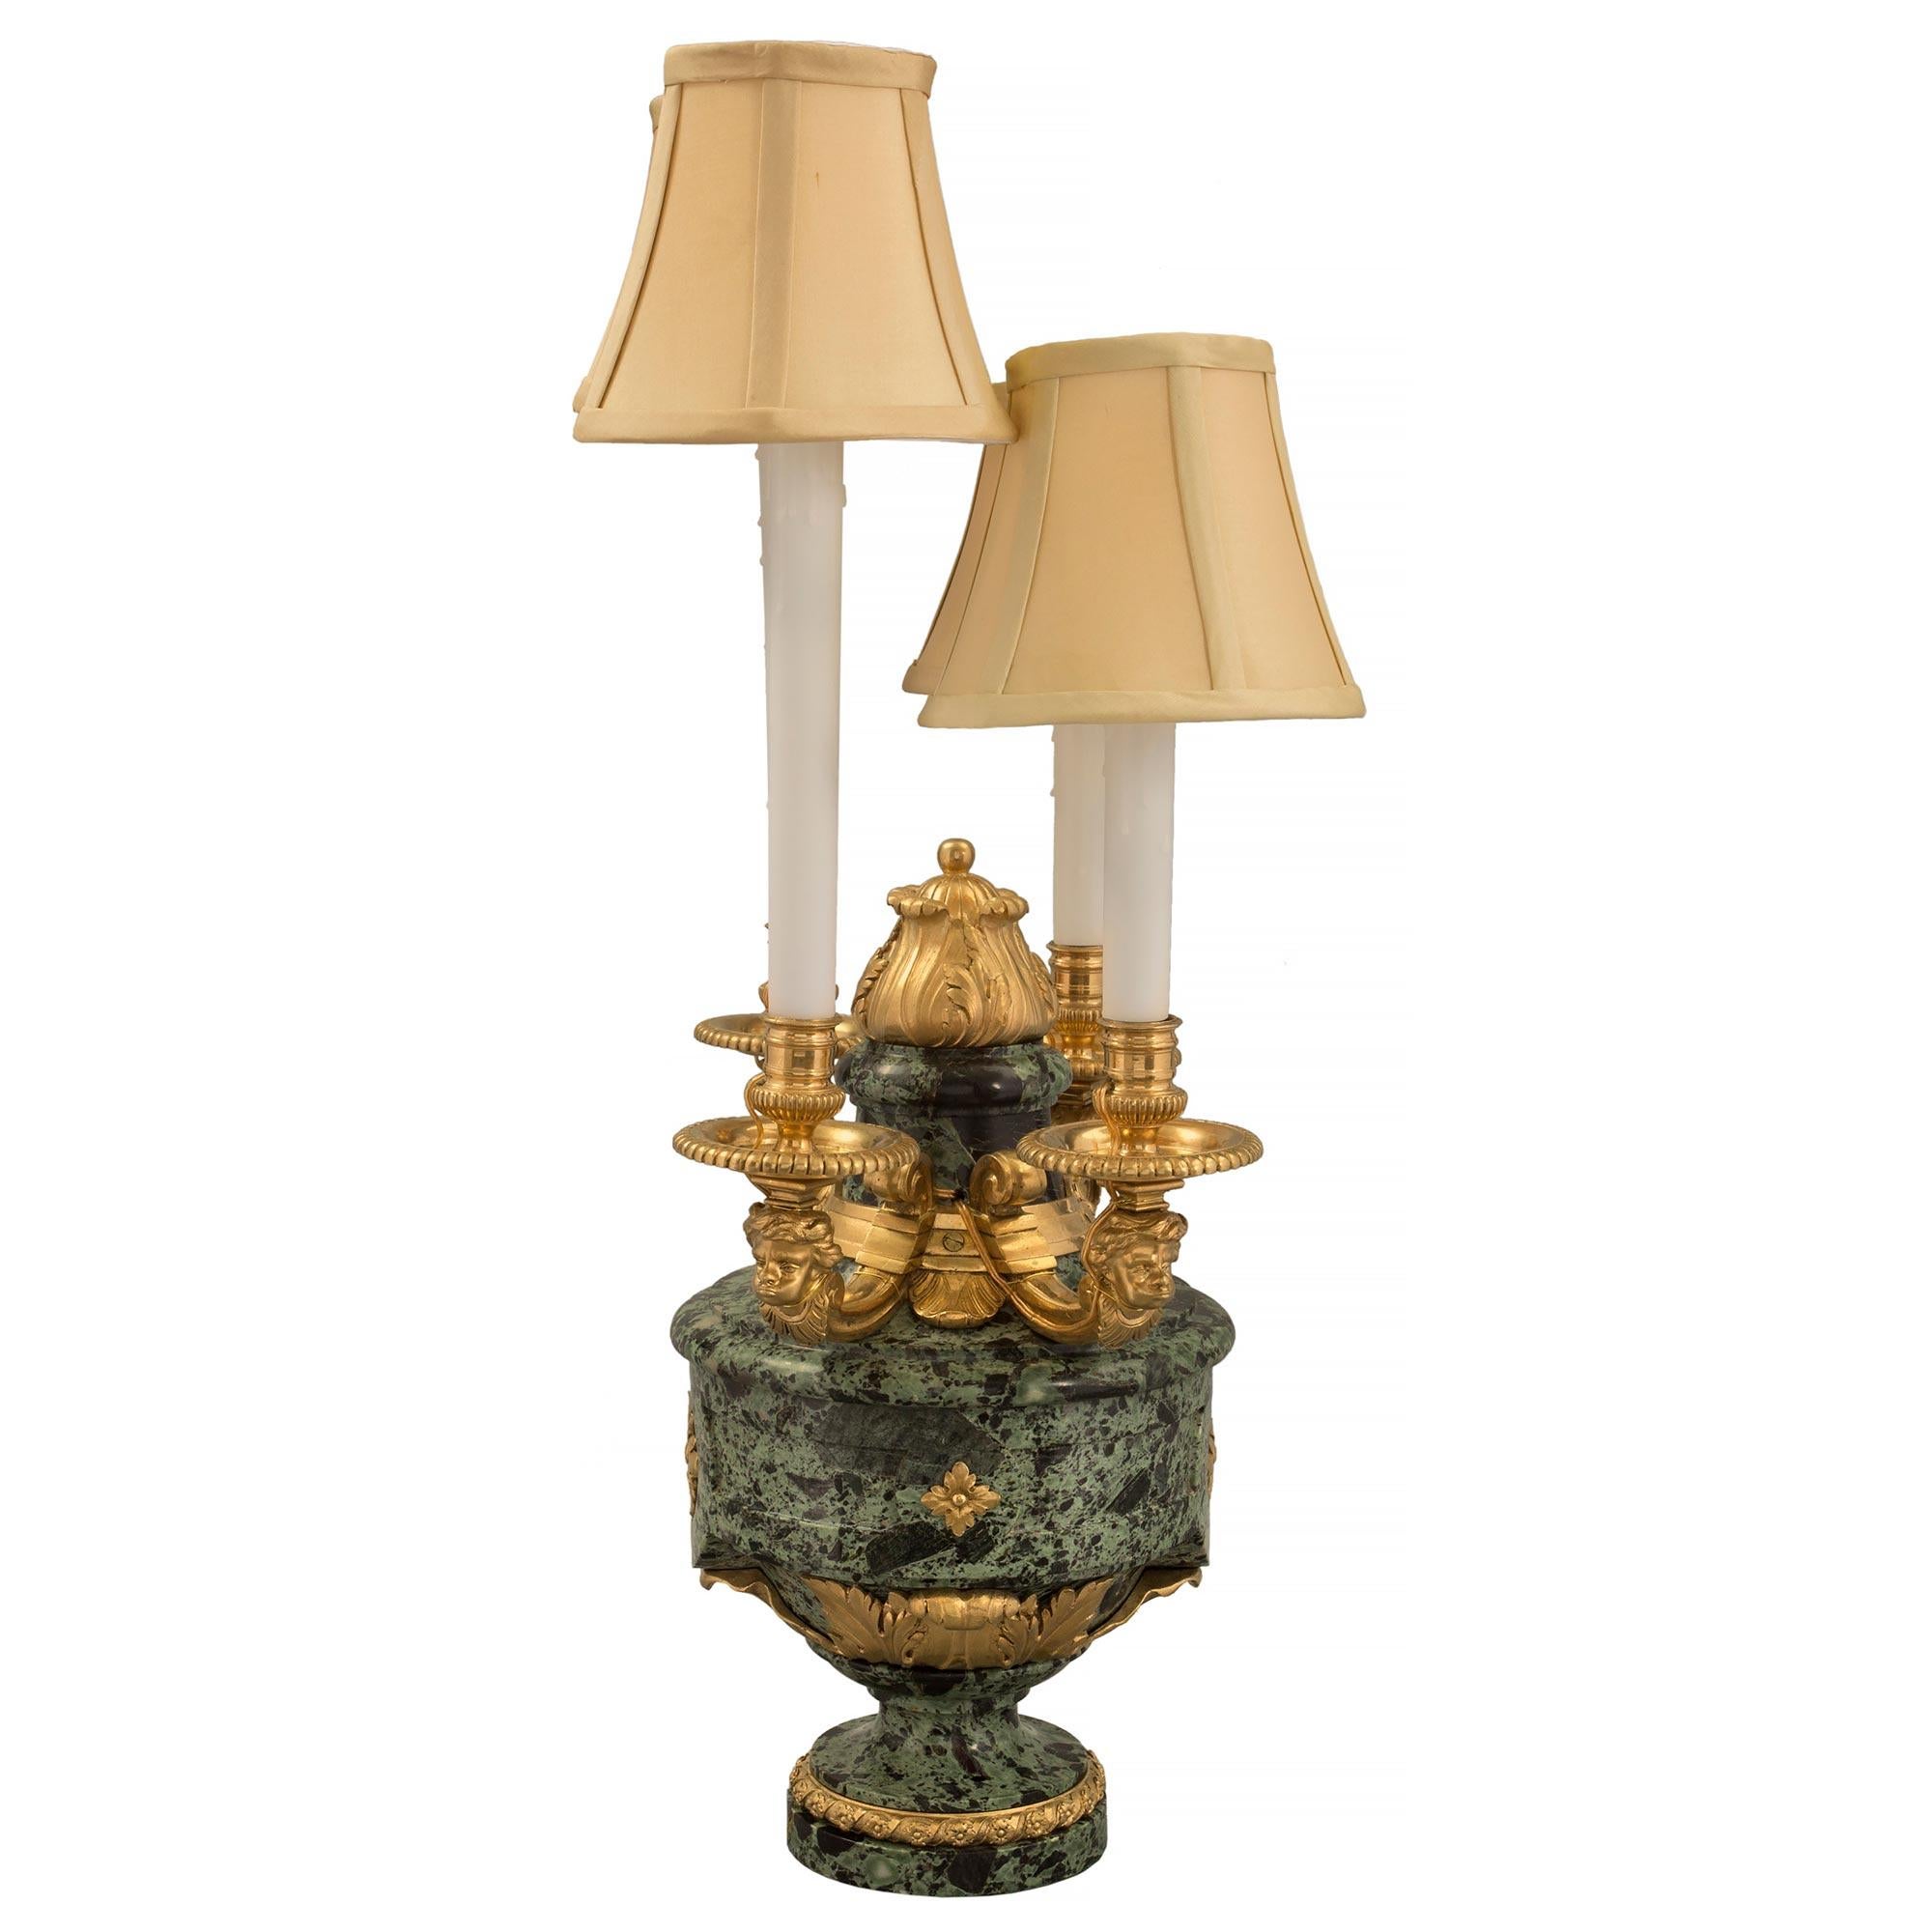 French 19th Century Louis XVI St. Belle Époque Period Marble and Ormolu Lamps In Good Condition For Sale In West Palm Beach, FL